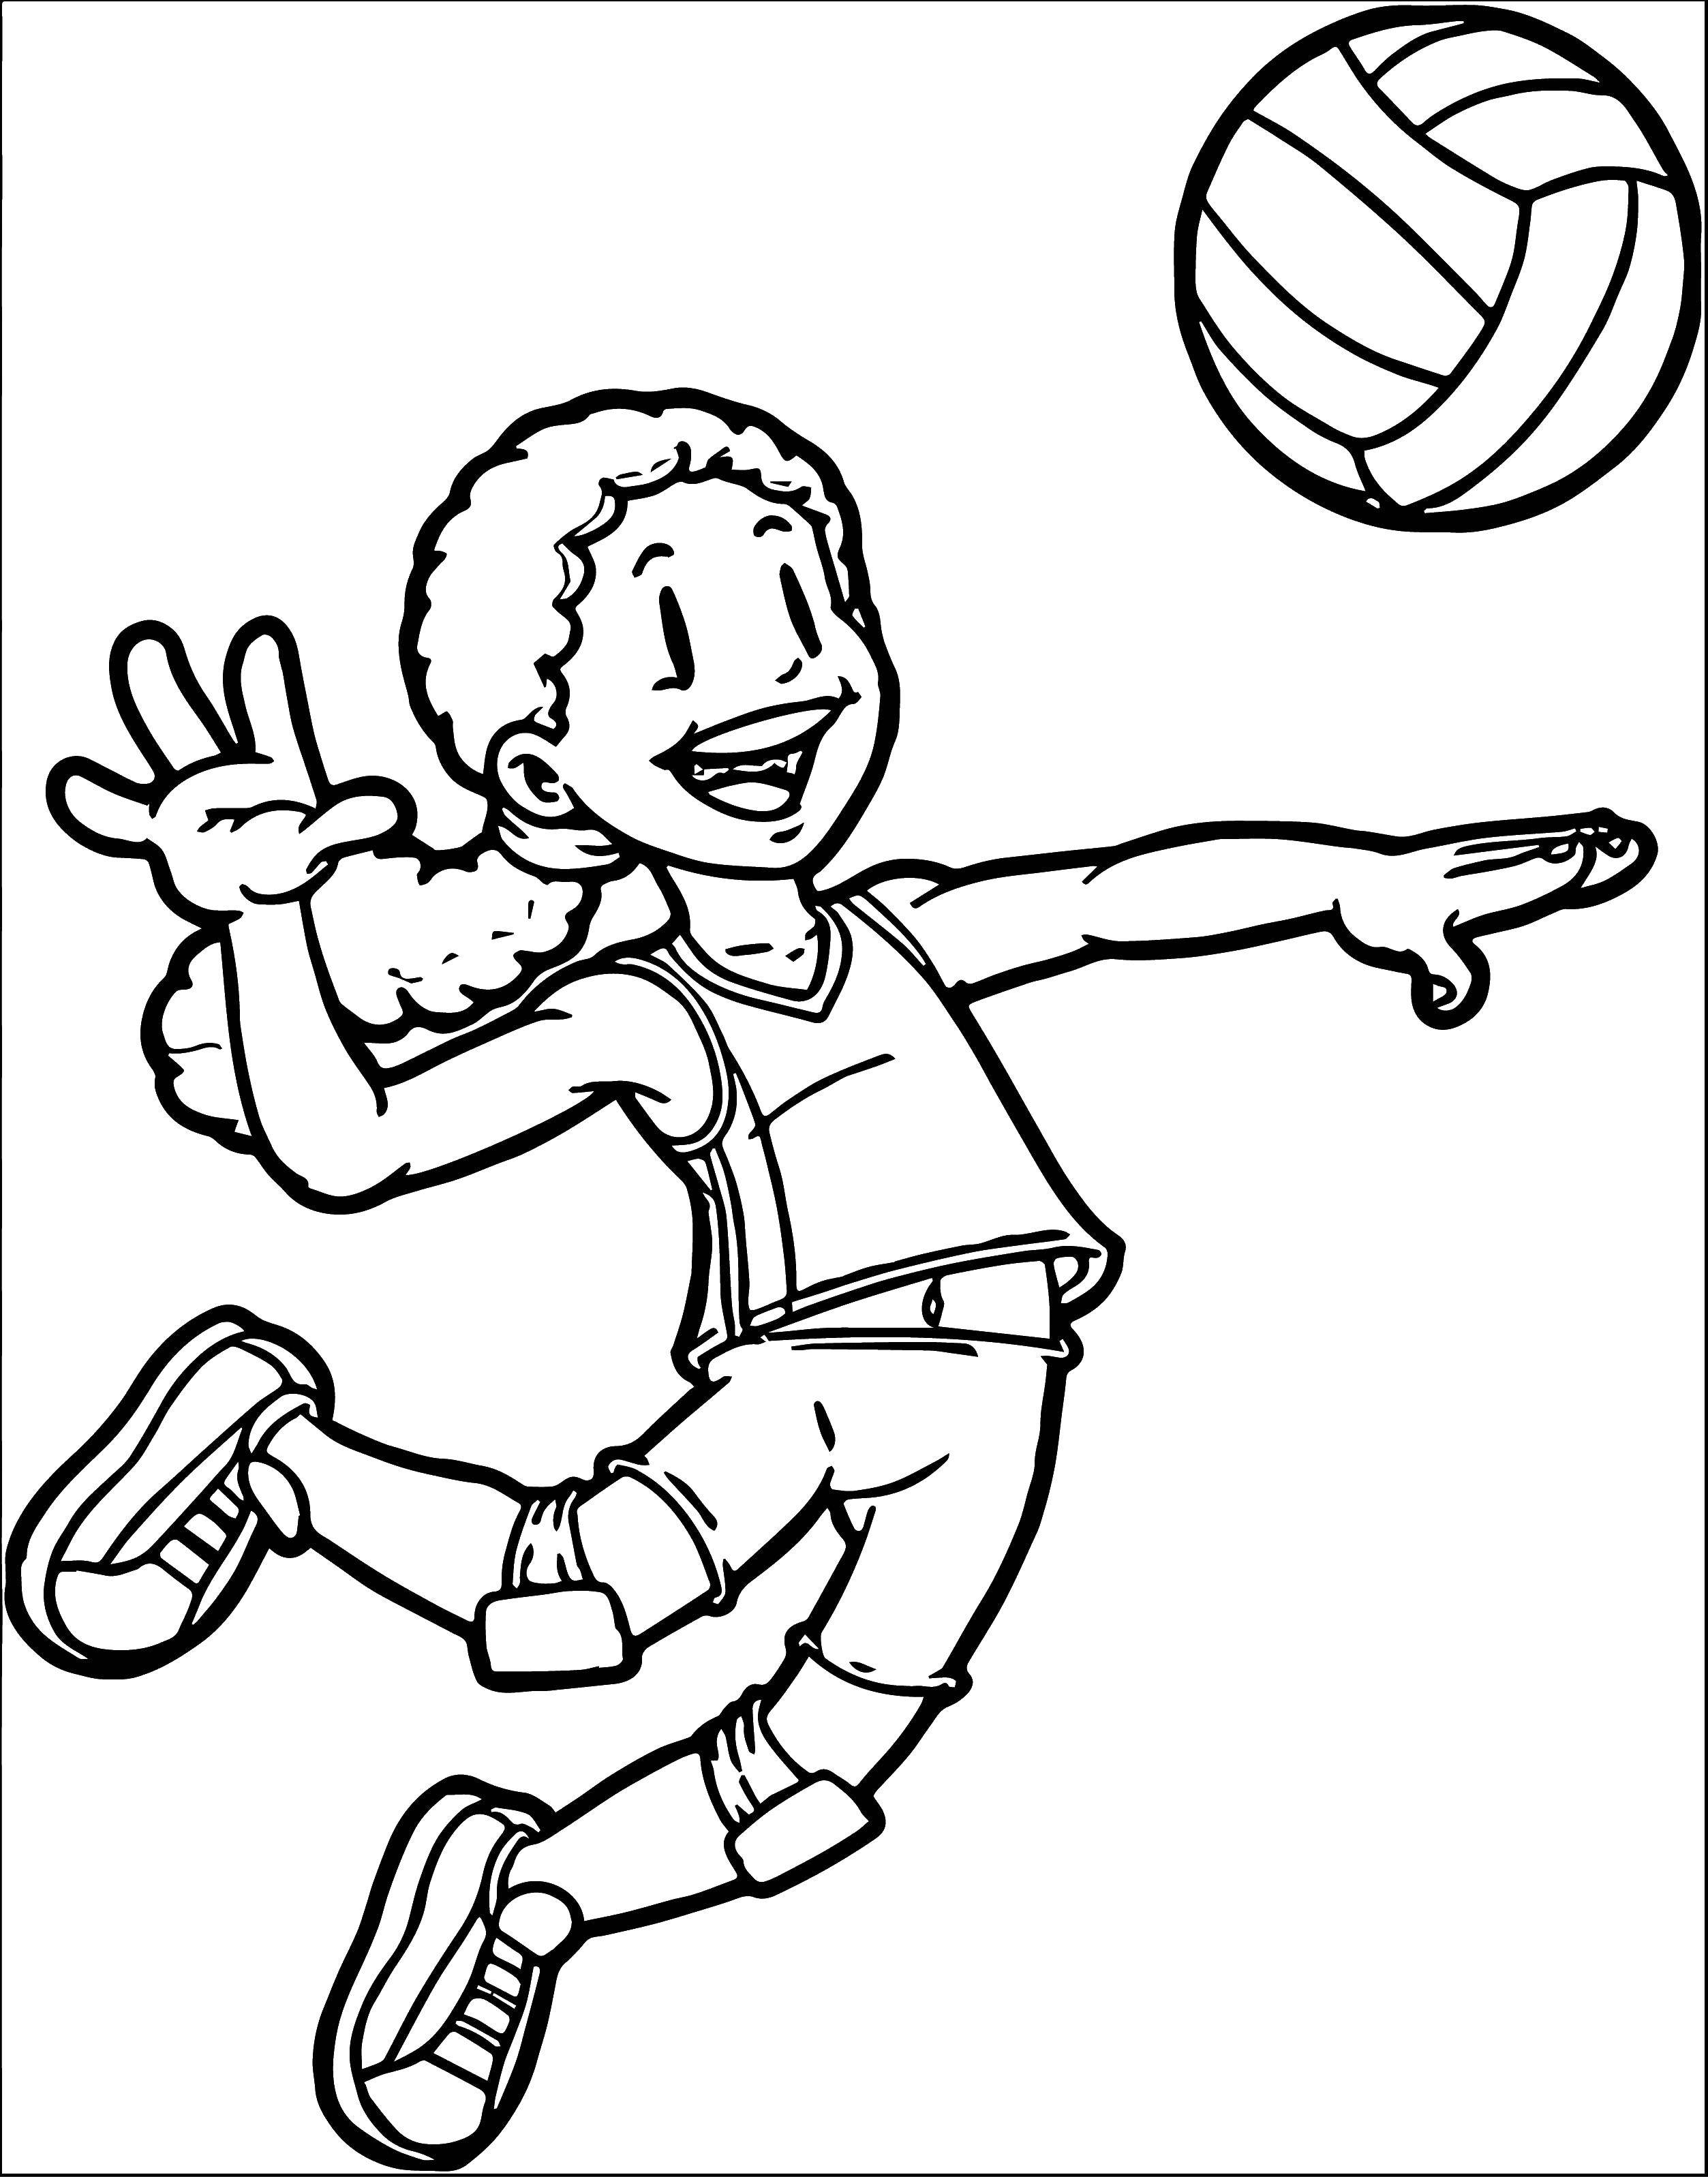 Coloring Girl playing volleyball. Category Children playing. Tags:  girl, ball.